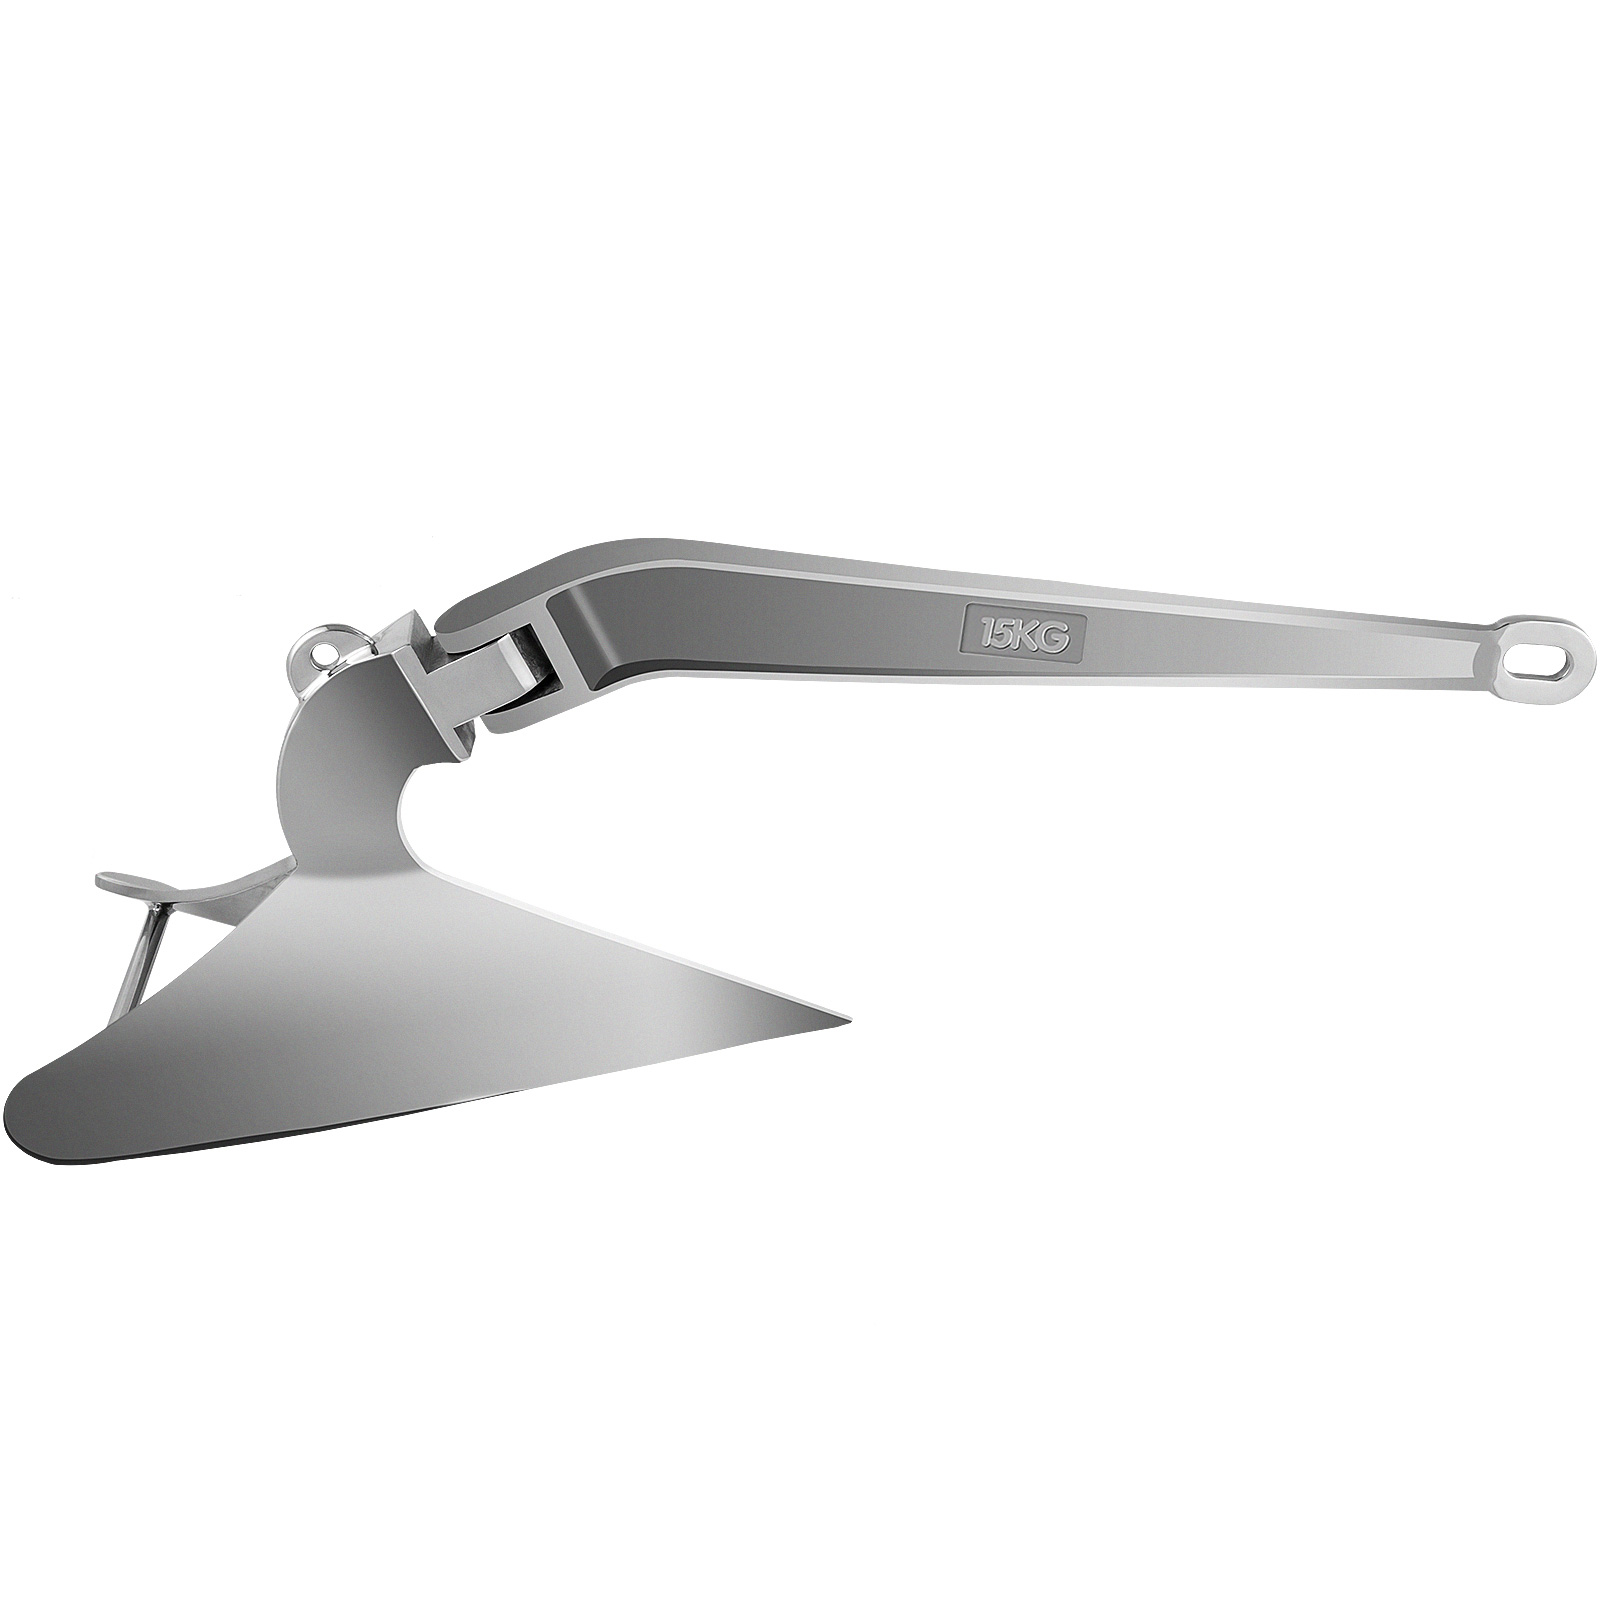 VEVOR 33 lb Plow Style Boat Anchor 15 kg 30-43ft 316 Stainless Steel Anchor от Vevor Many GEOs